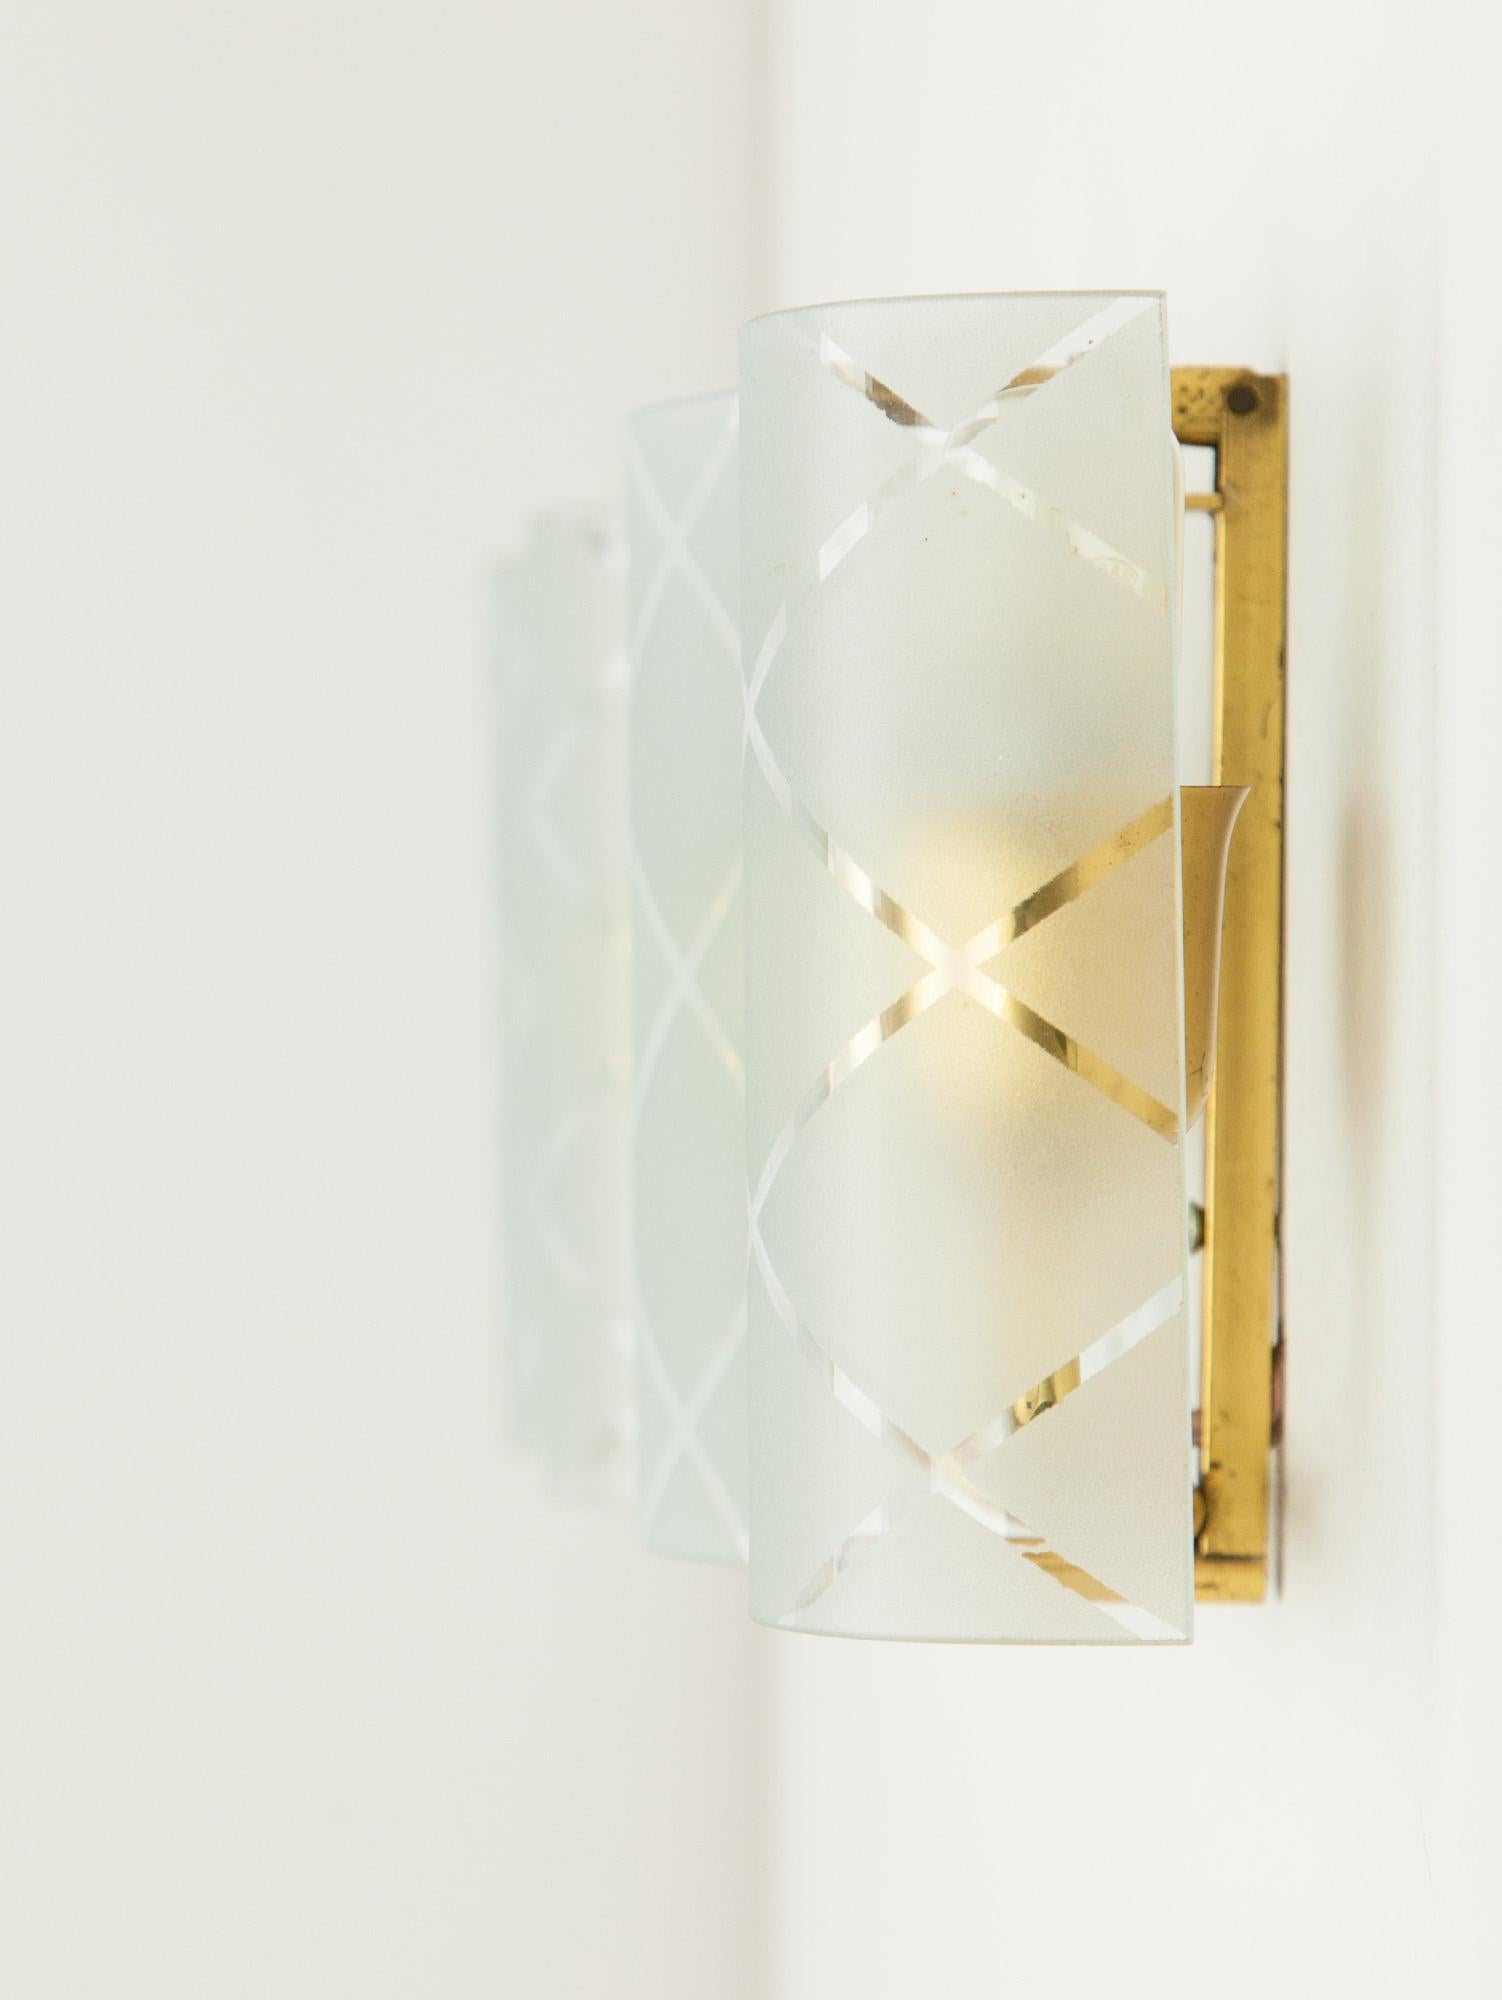 20th Century Italian Etched Glass & Brass Rectangular Wall Lights, 1950s  For Sale